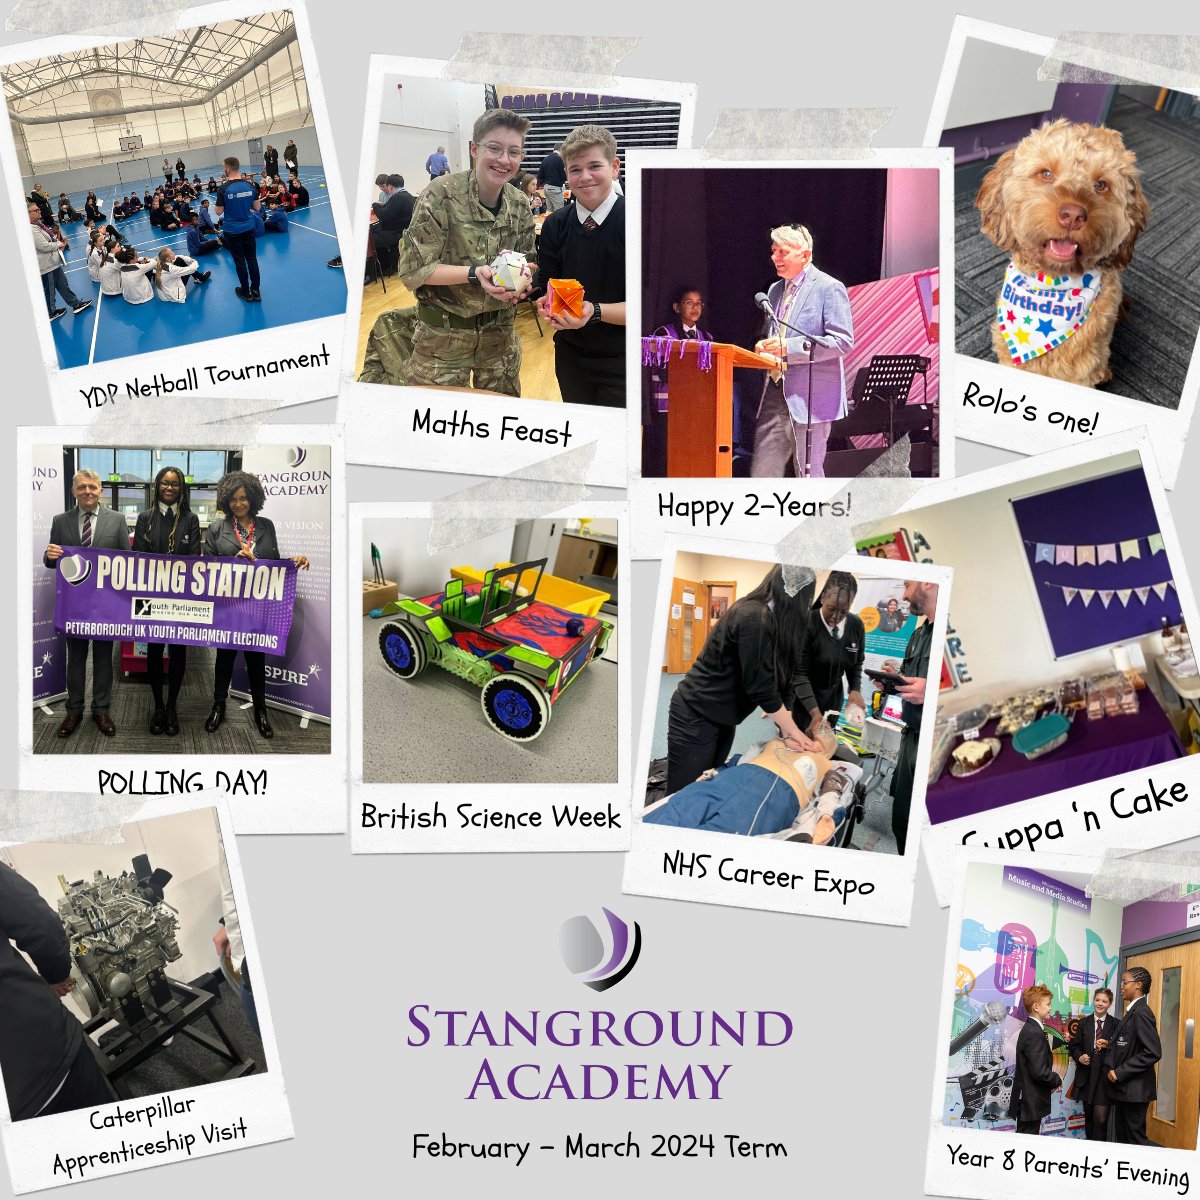 From cuppa 'n cake sessions to celebrating milestones, it's been a journey of collaboration, growth, and celebration. ✨ Highlights include British Science Week, parent evenings, and NHS career expeditions. Let's keep building on these successes! #StangroundAcademy #Community